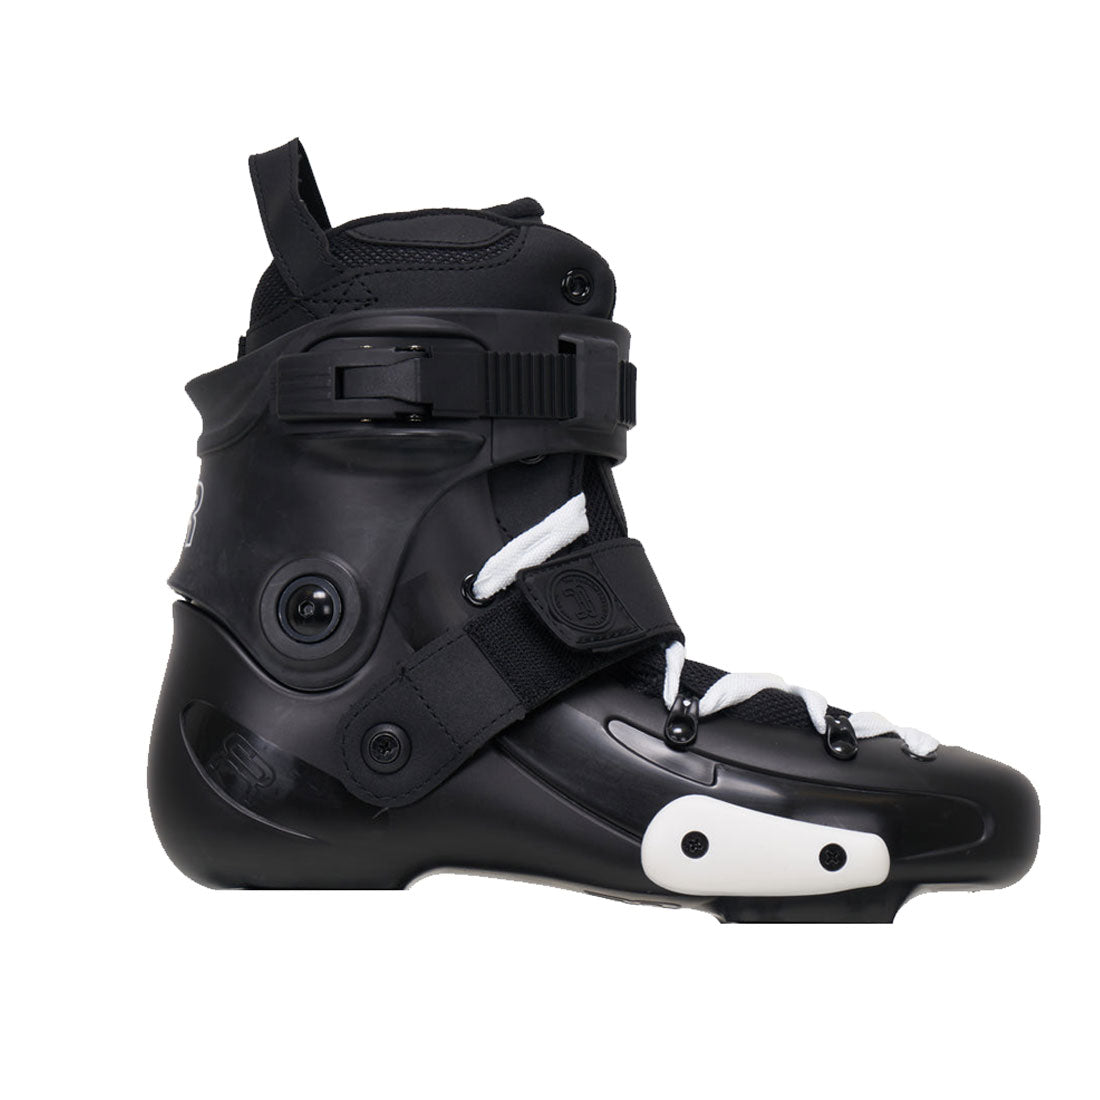 FR Skates FRX Boot 13.5US EU47 Inline Hardware and Parts